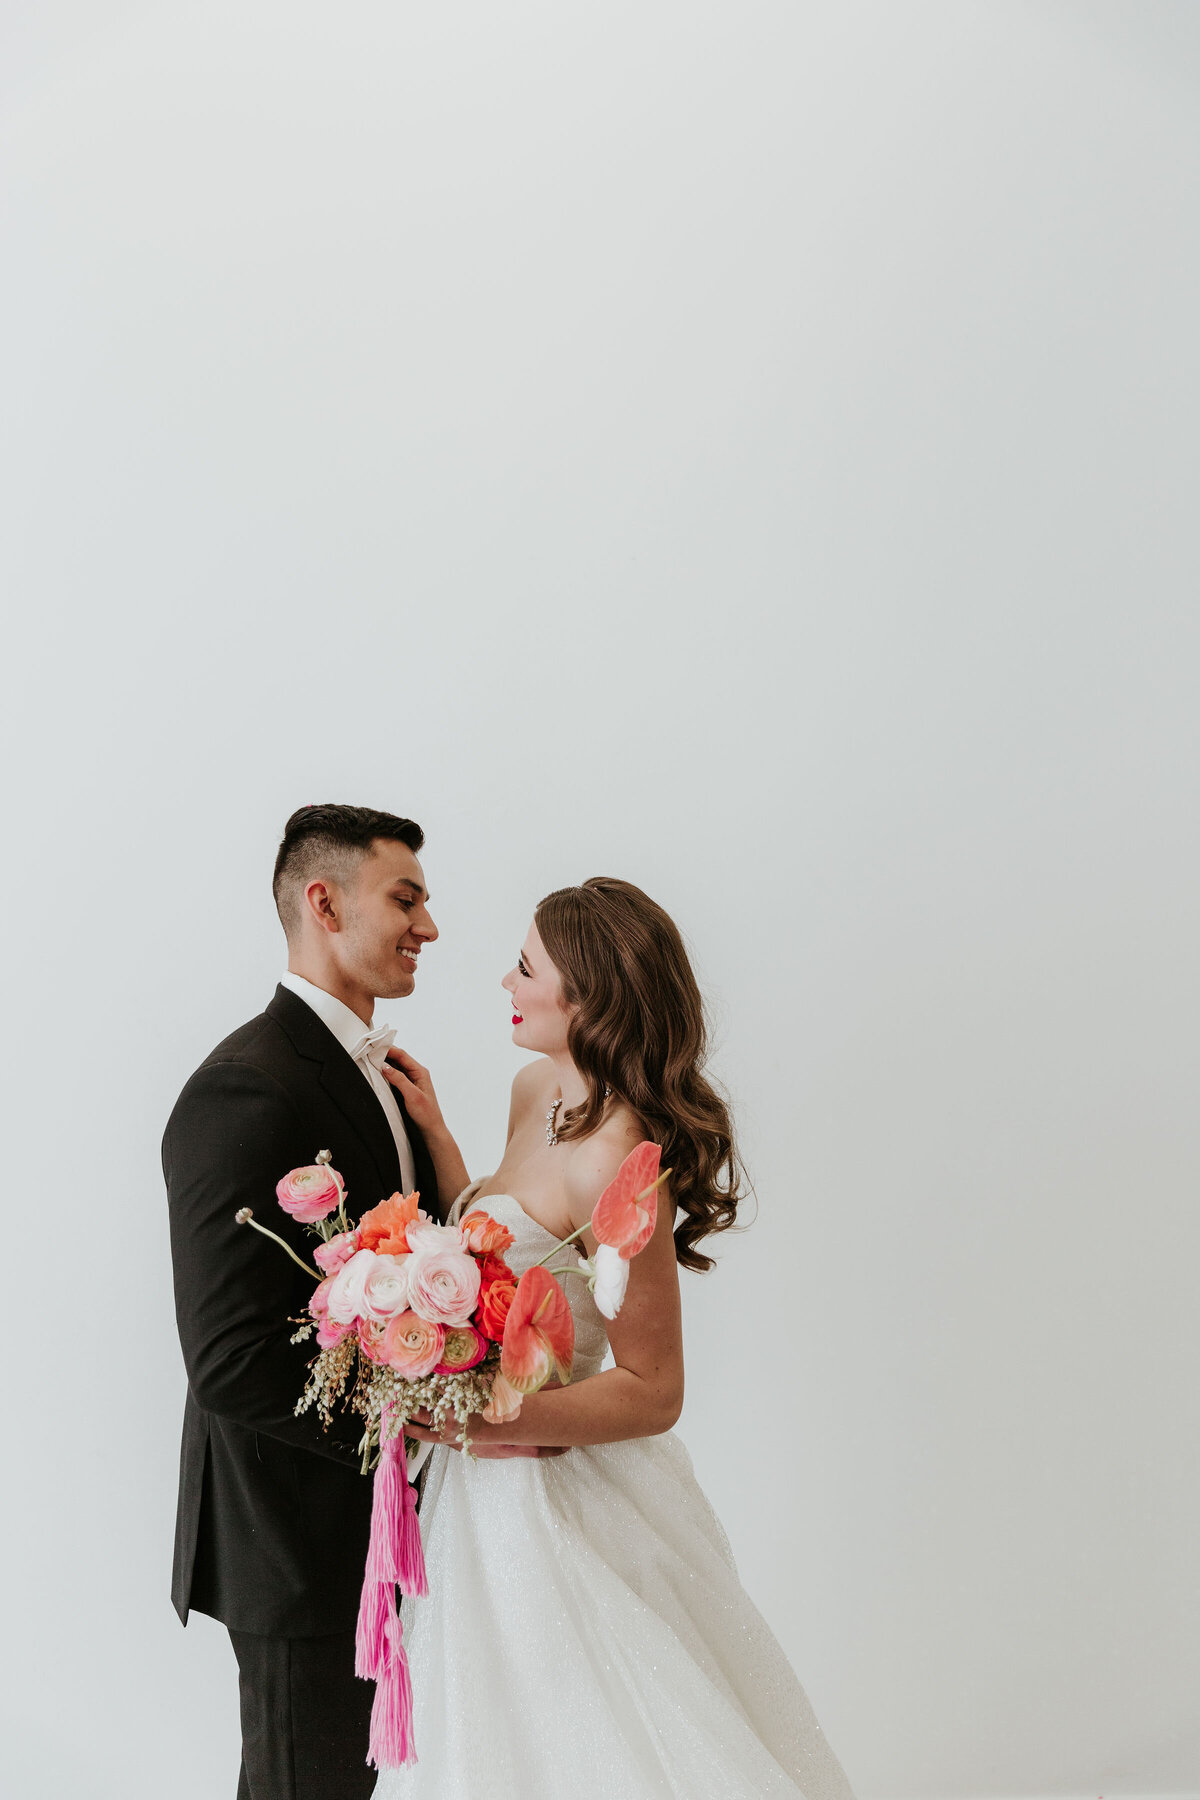 Contemporary bride holding colourful pink bouquet, wearing gown from Cameo & Cufflinks, a contemporary bridal boutique based in Calgary, Alberta. Featured on the Brontë Bride Vendor Guide.